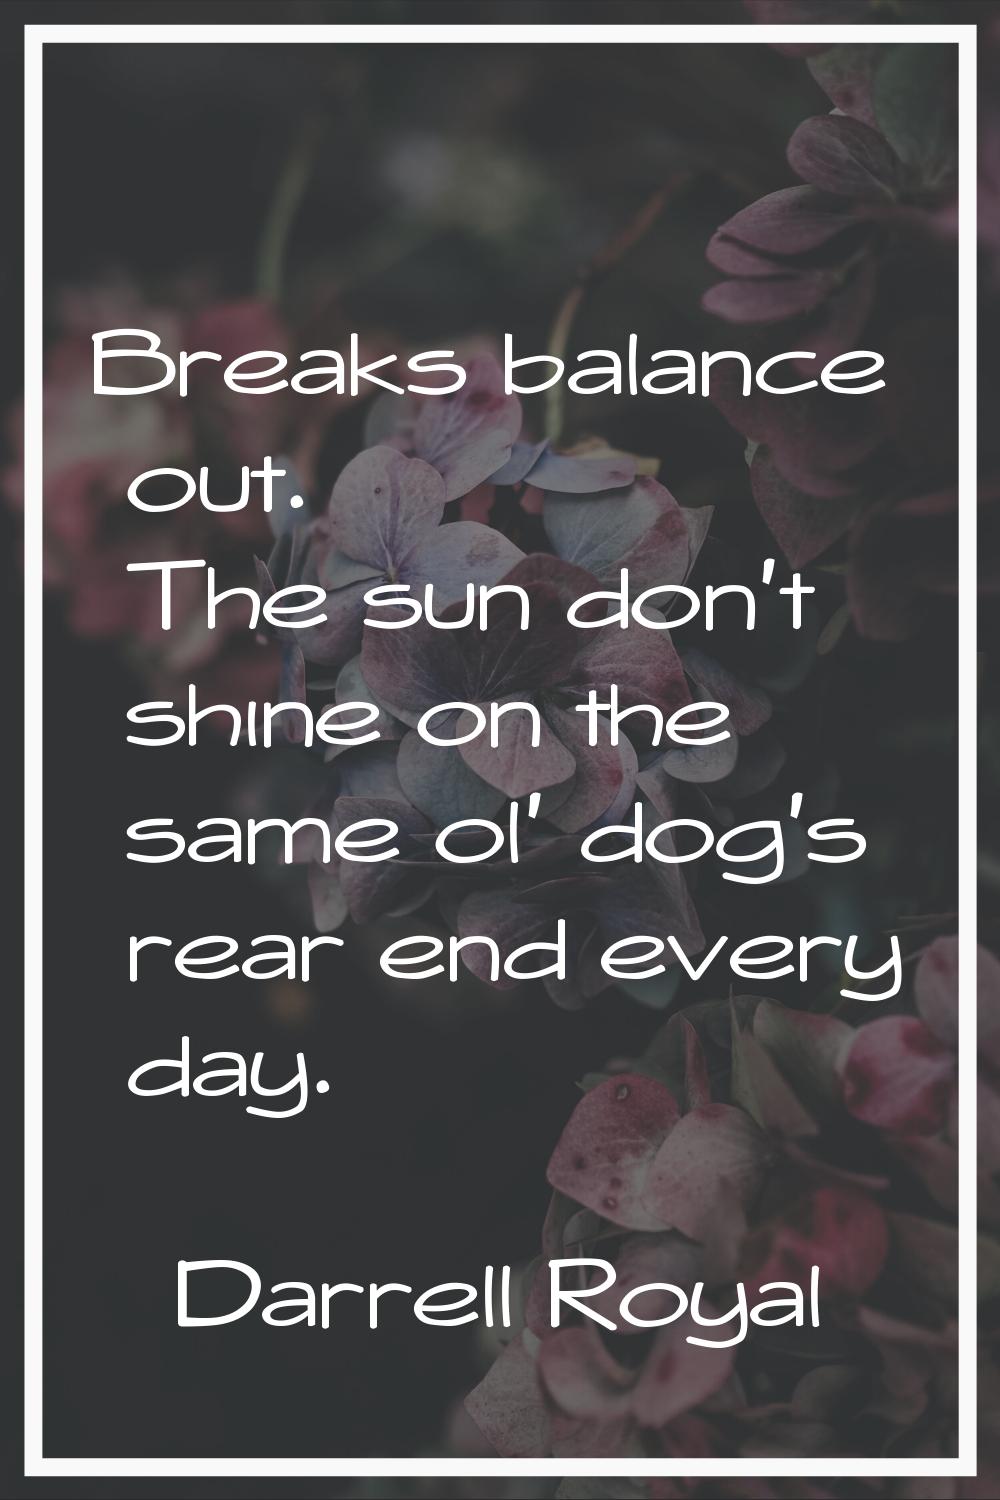 Breaks balance out. The sun don't shine on the same ol' dog's rear end every day.